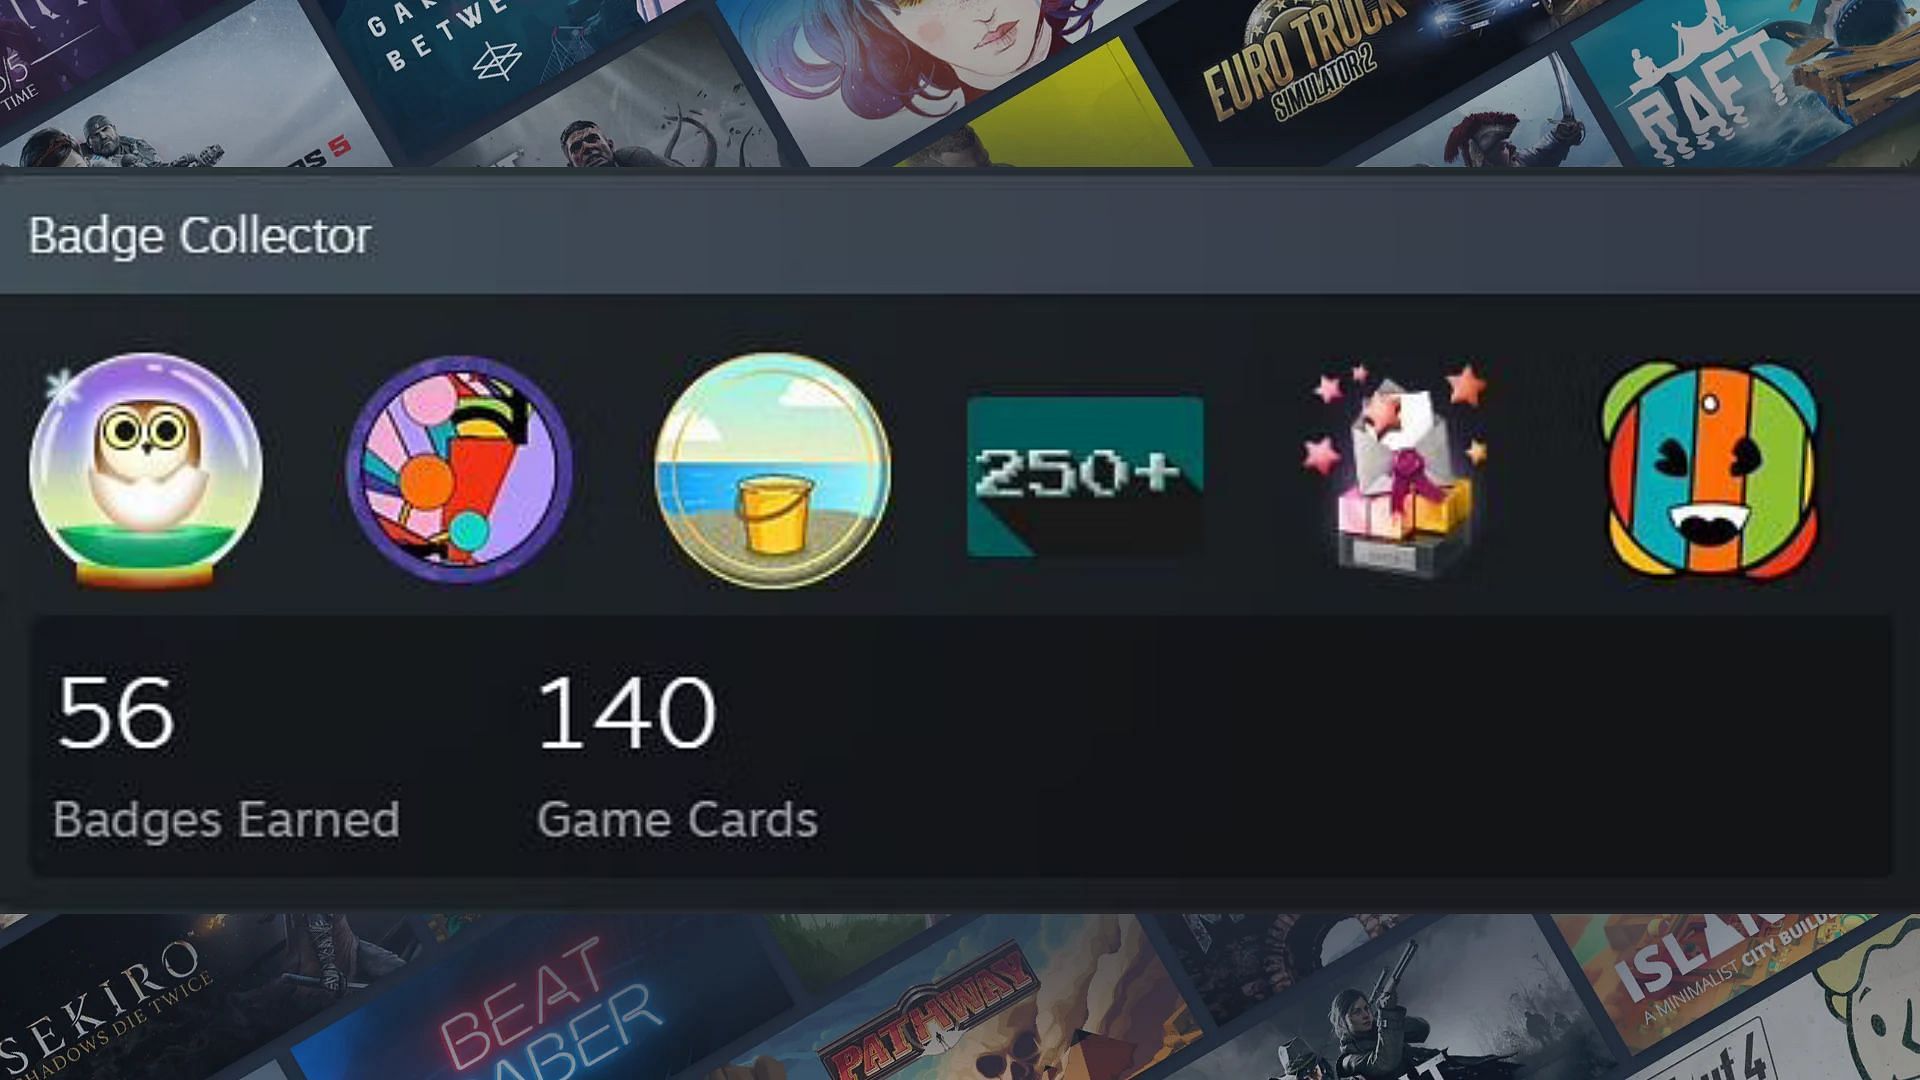 Steam Badges and level